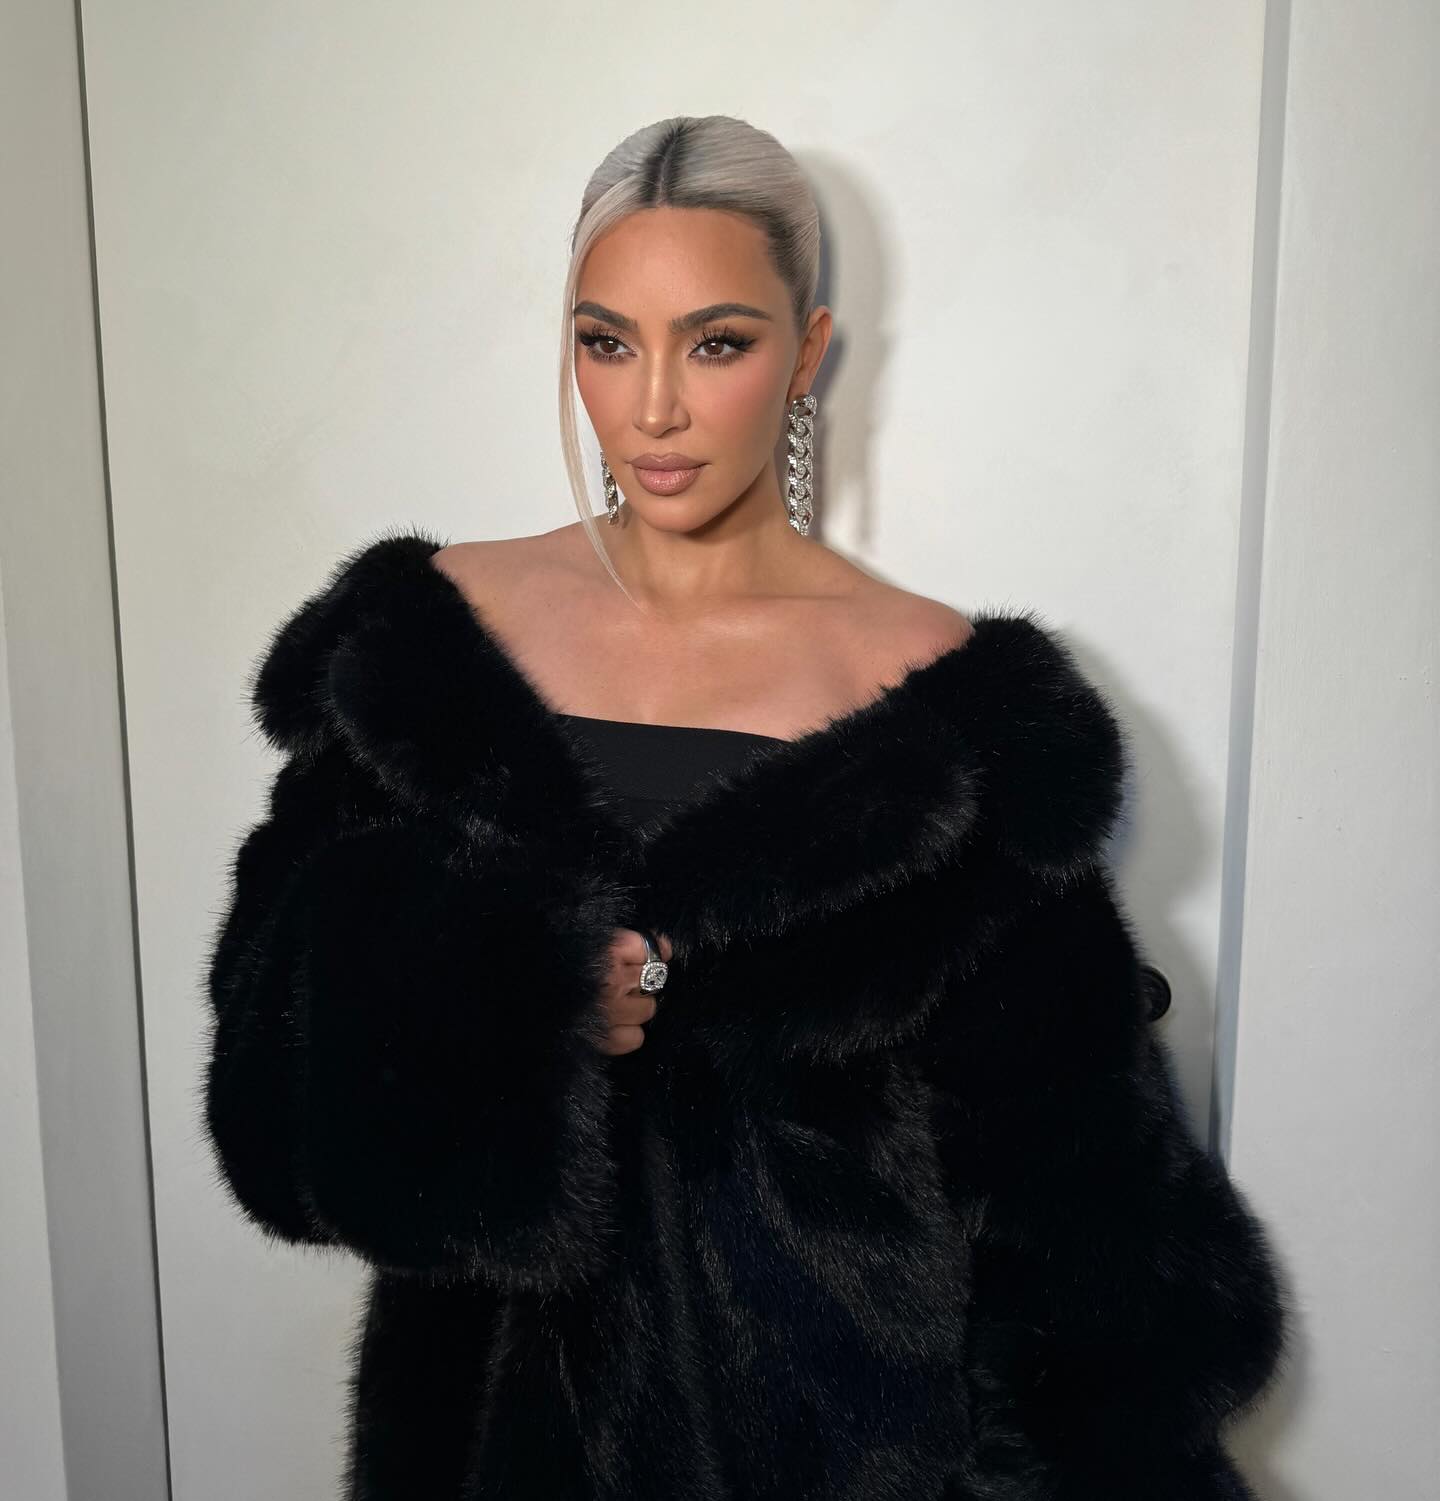 Fans claimed Kim's transformation is meant to serve as a ‘distraction’ from her ‘surgeries’